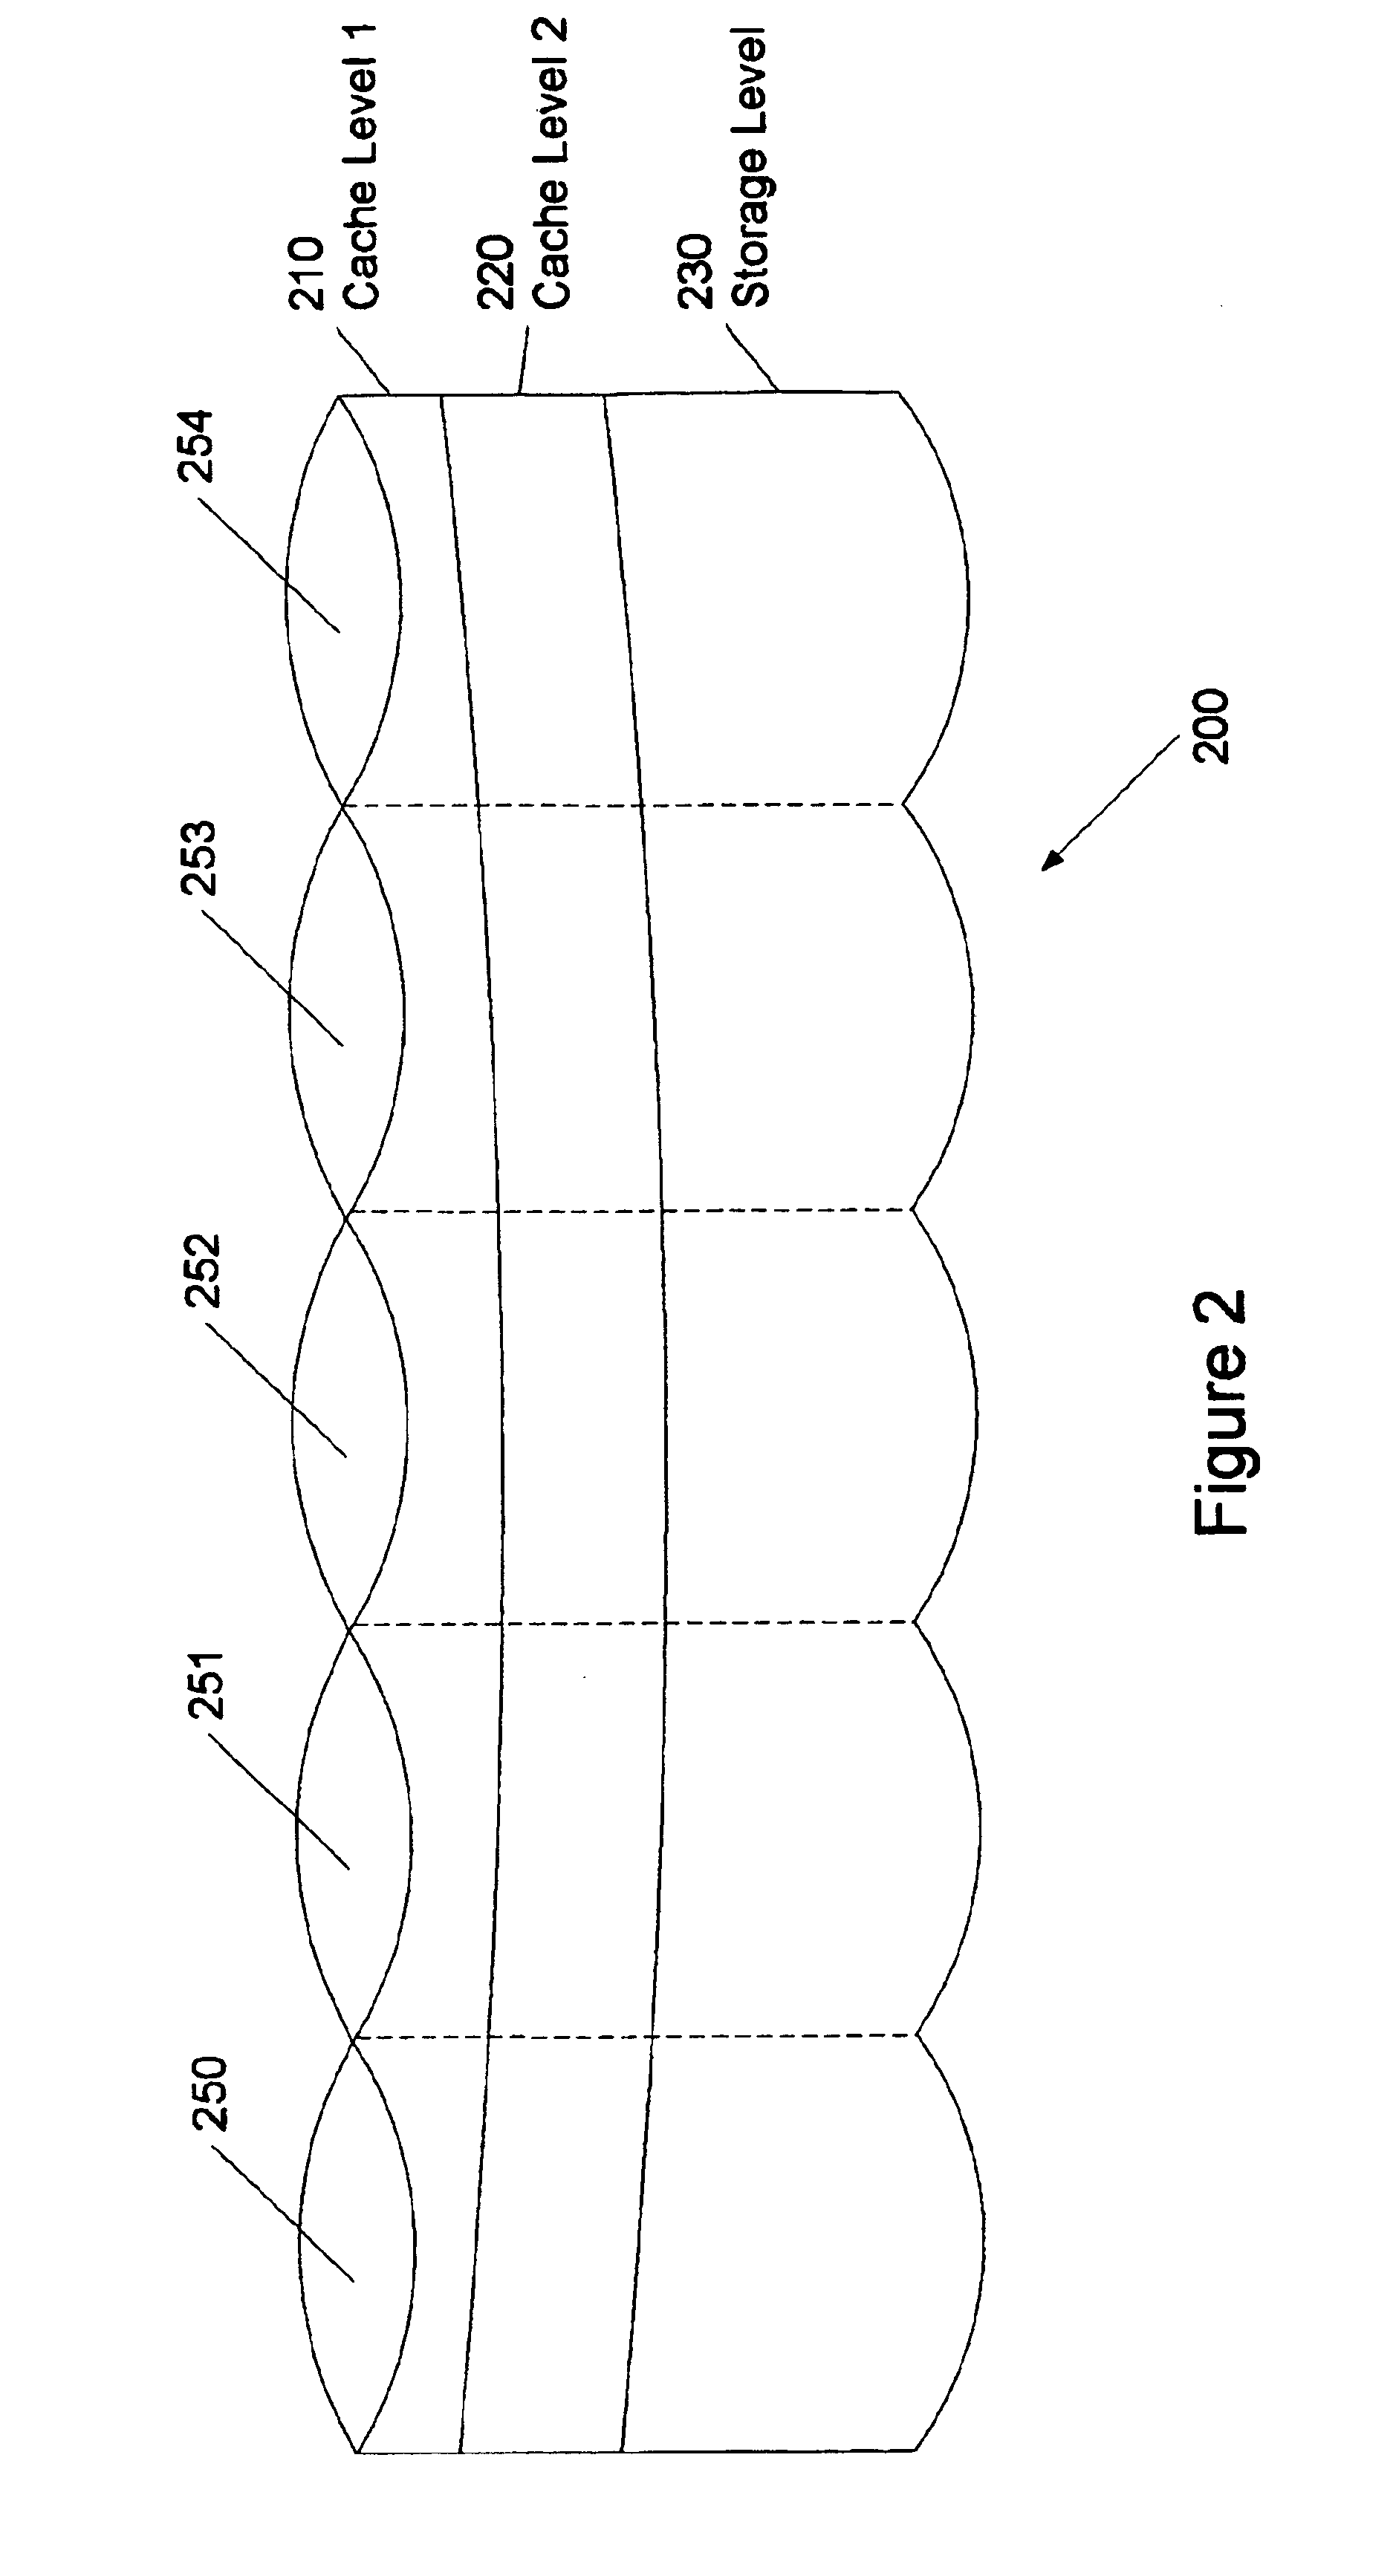 System and method for hierarchical data storage